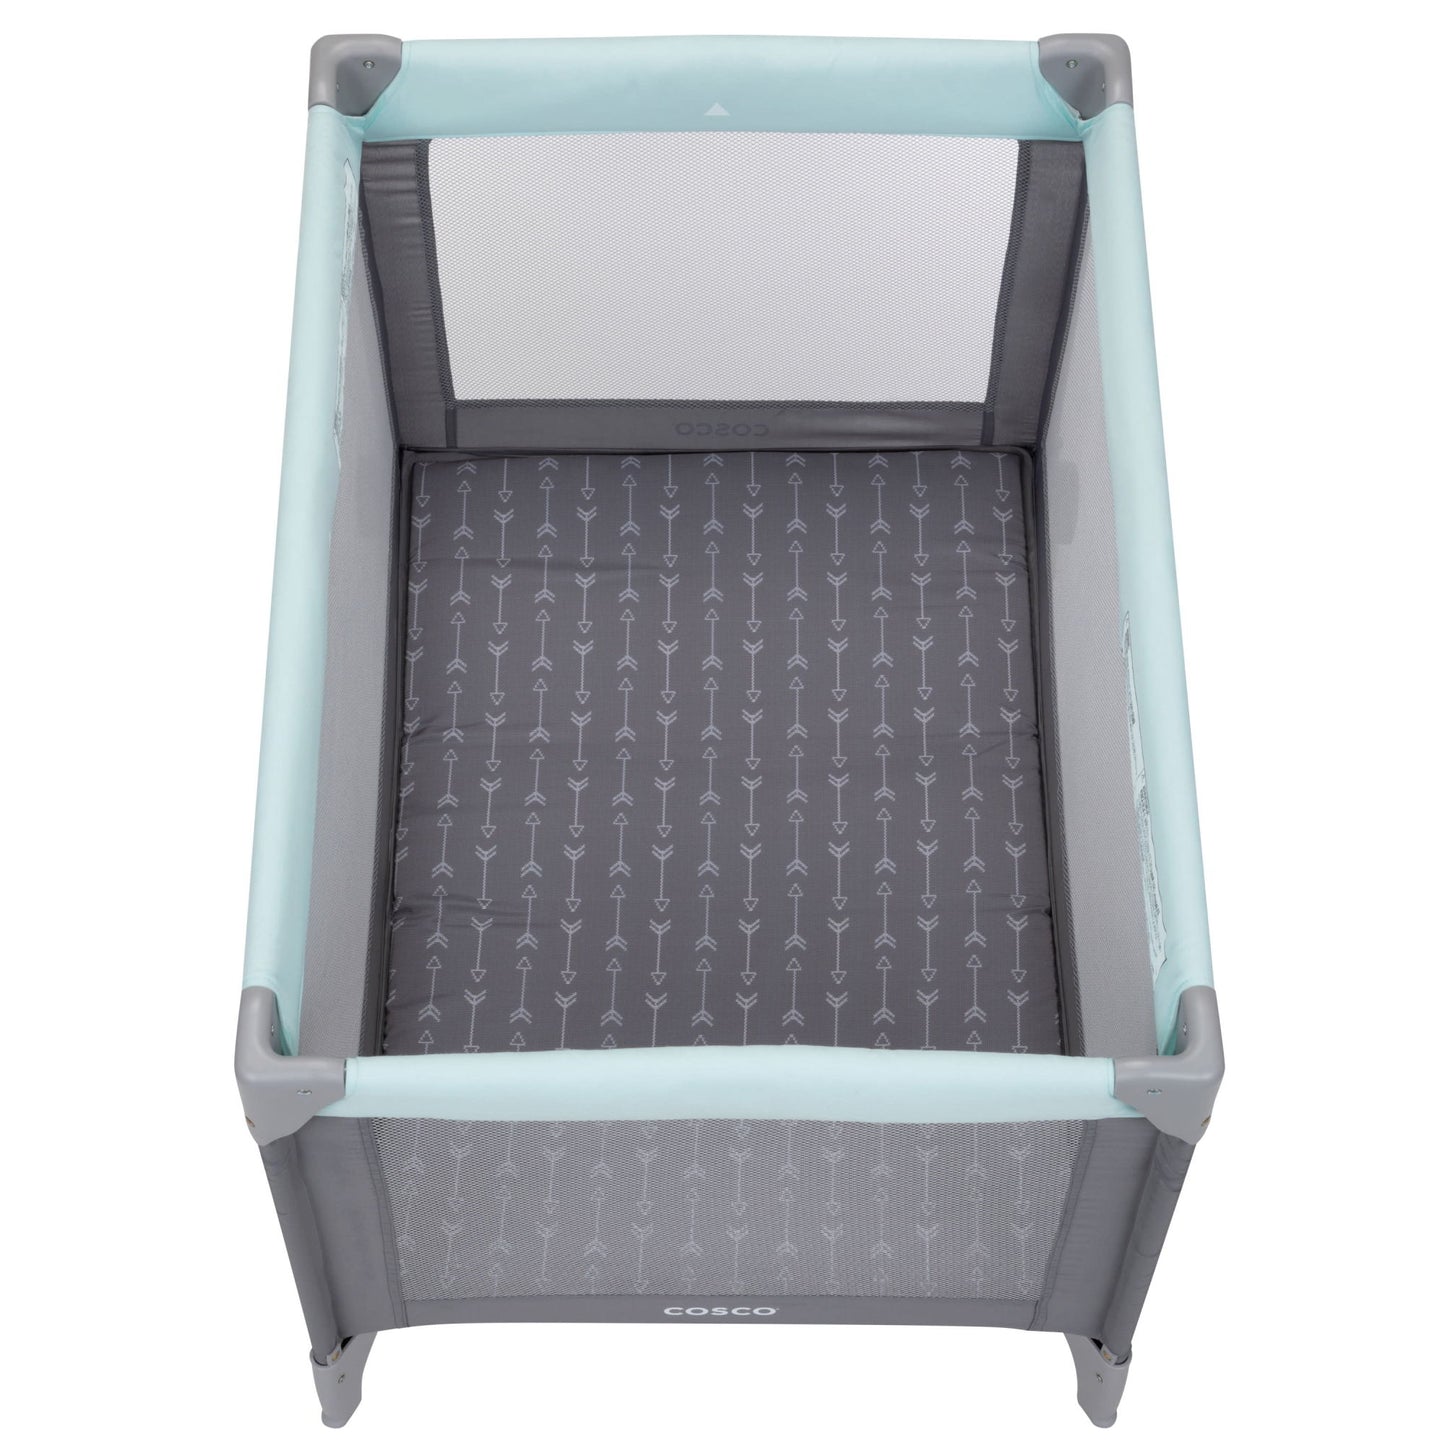 Funsport Portable Compact Baby Play Yard